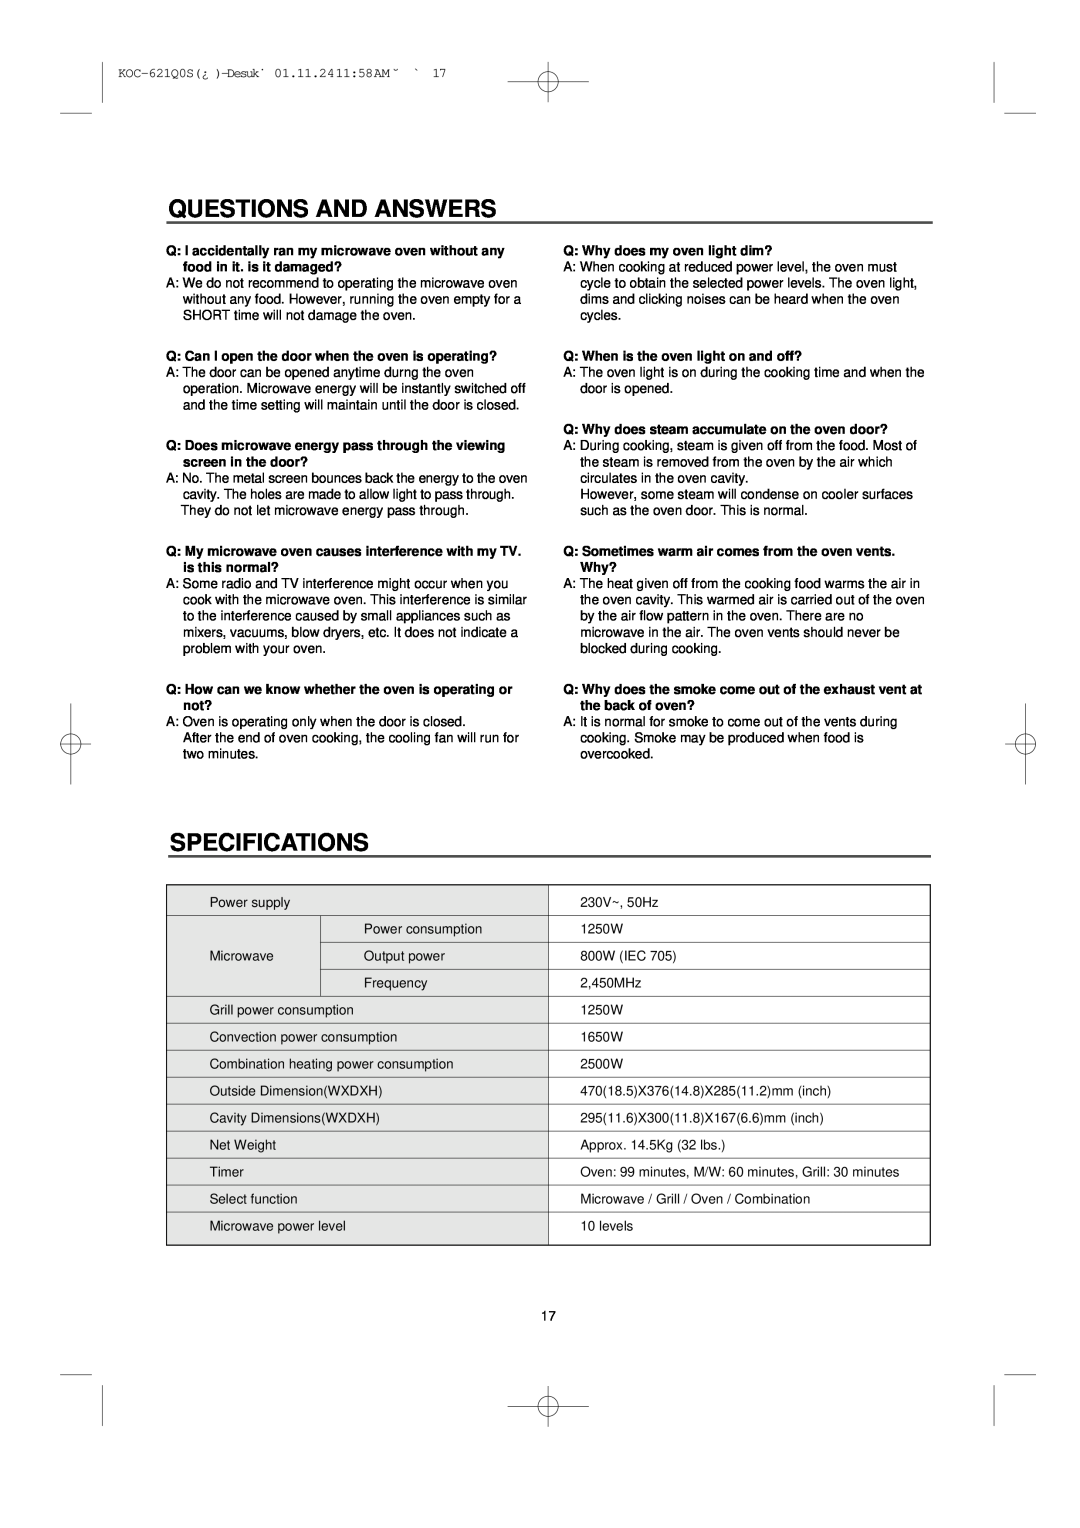 Daewoo KOC-621Q owner manual Questions And Answers, Specifications, Q Can I open the door when the oven is operating? 